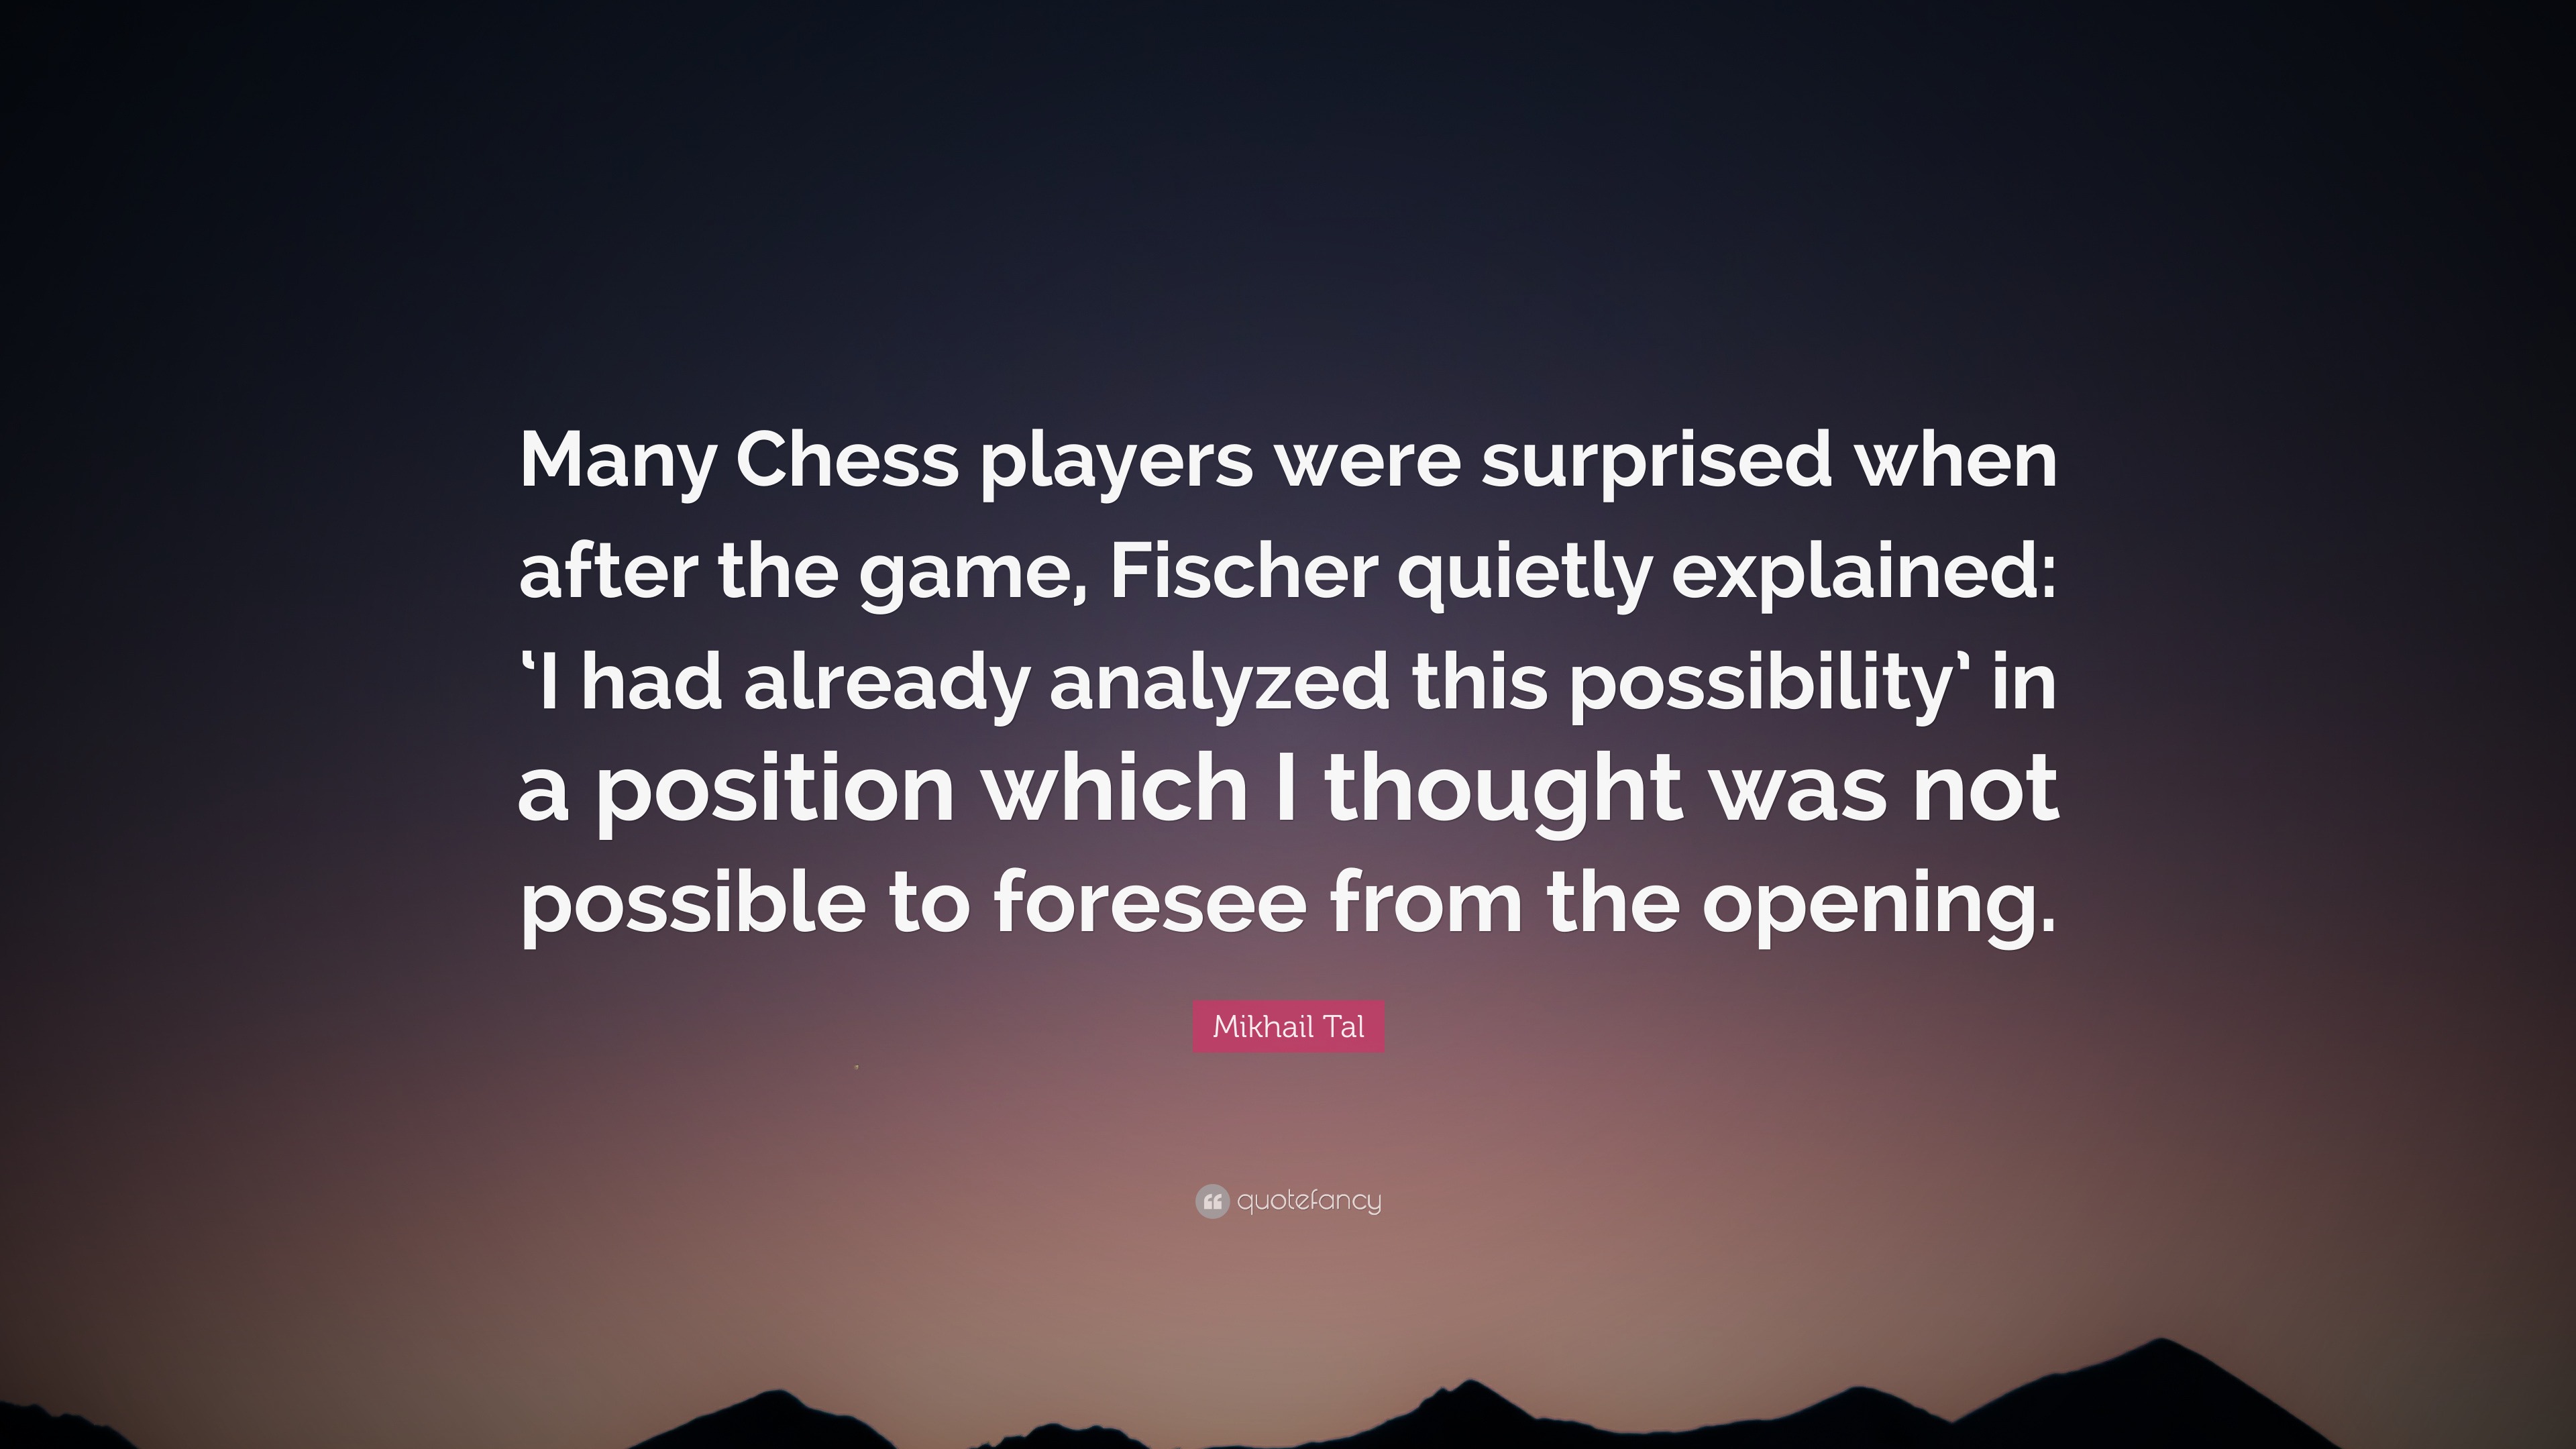 Mikhail Tal Quotes & Sayings (18 Quotations)